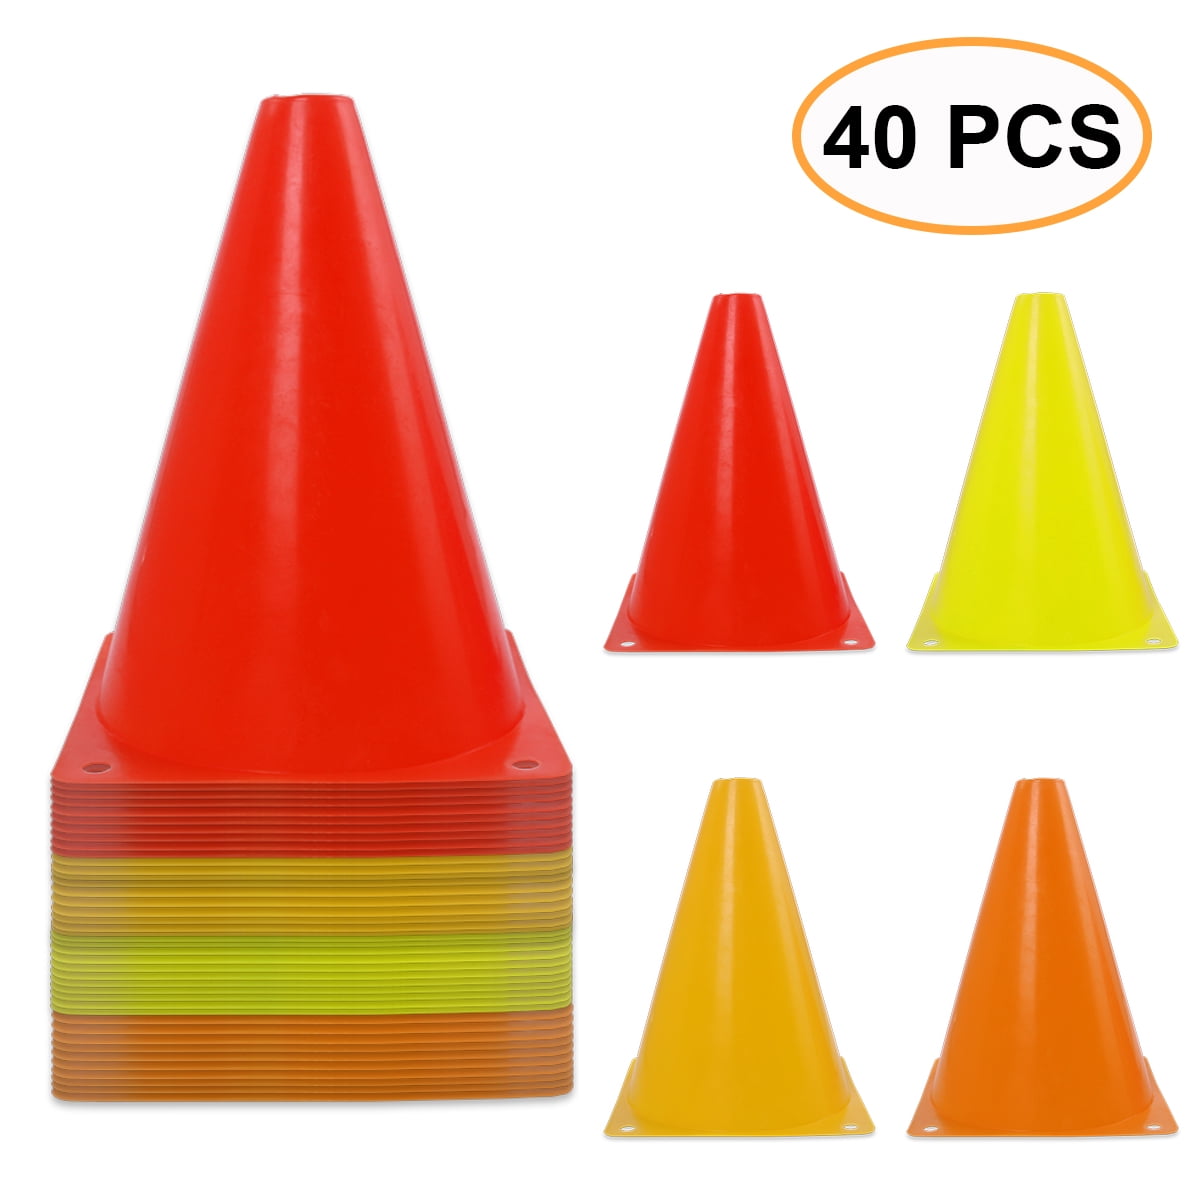 Training Traffic Cone Can Be Used To Mark Out Football Pitches Grounds 10 Pack 